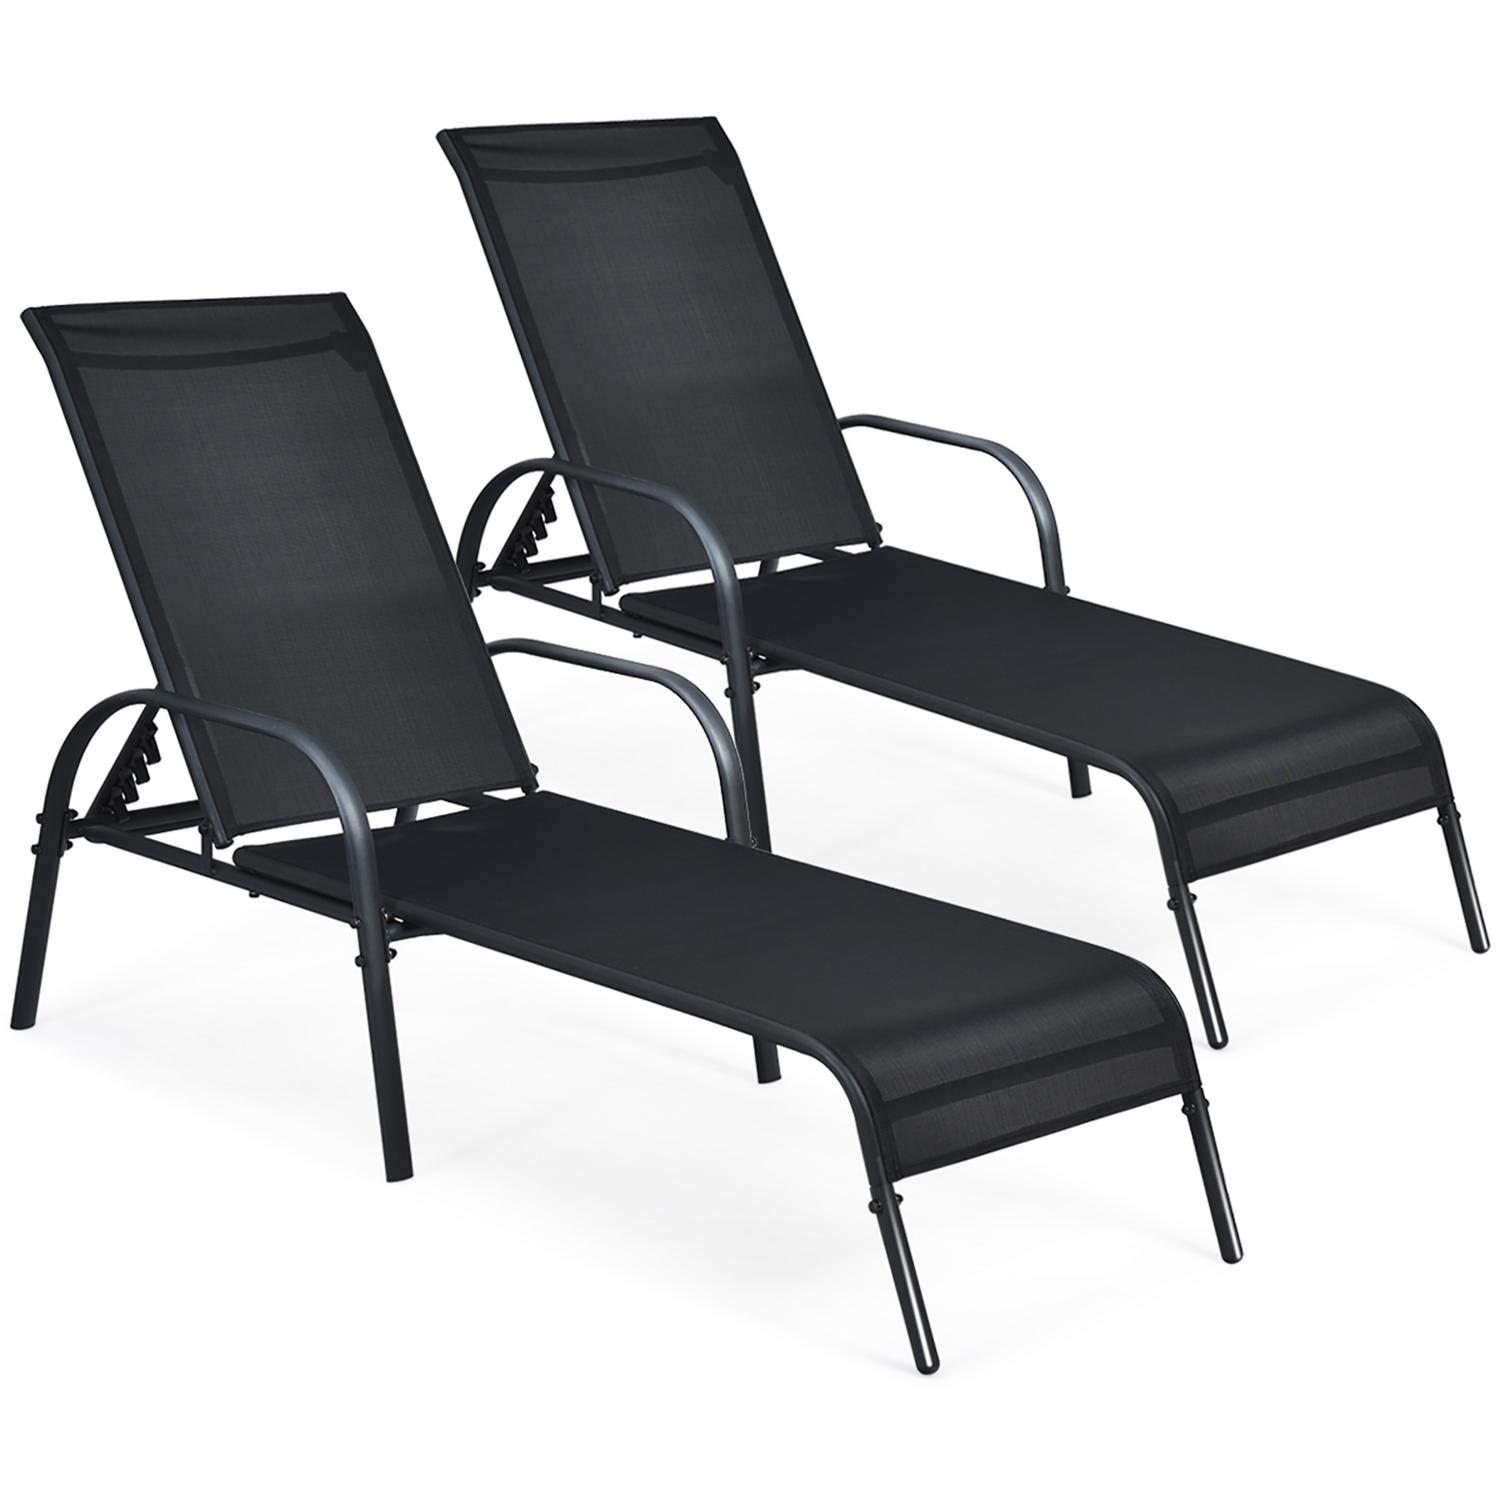 Set of 2 Patio Lounge Chairs Sling Chaise Lounge Recliner Adjustable